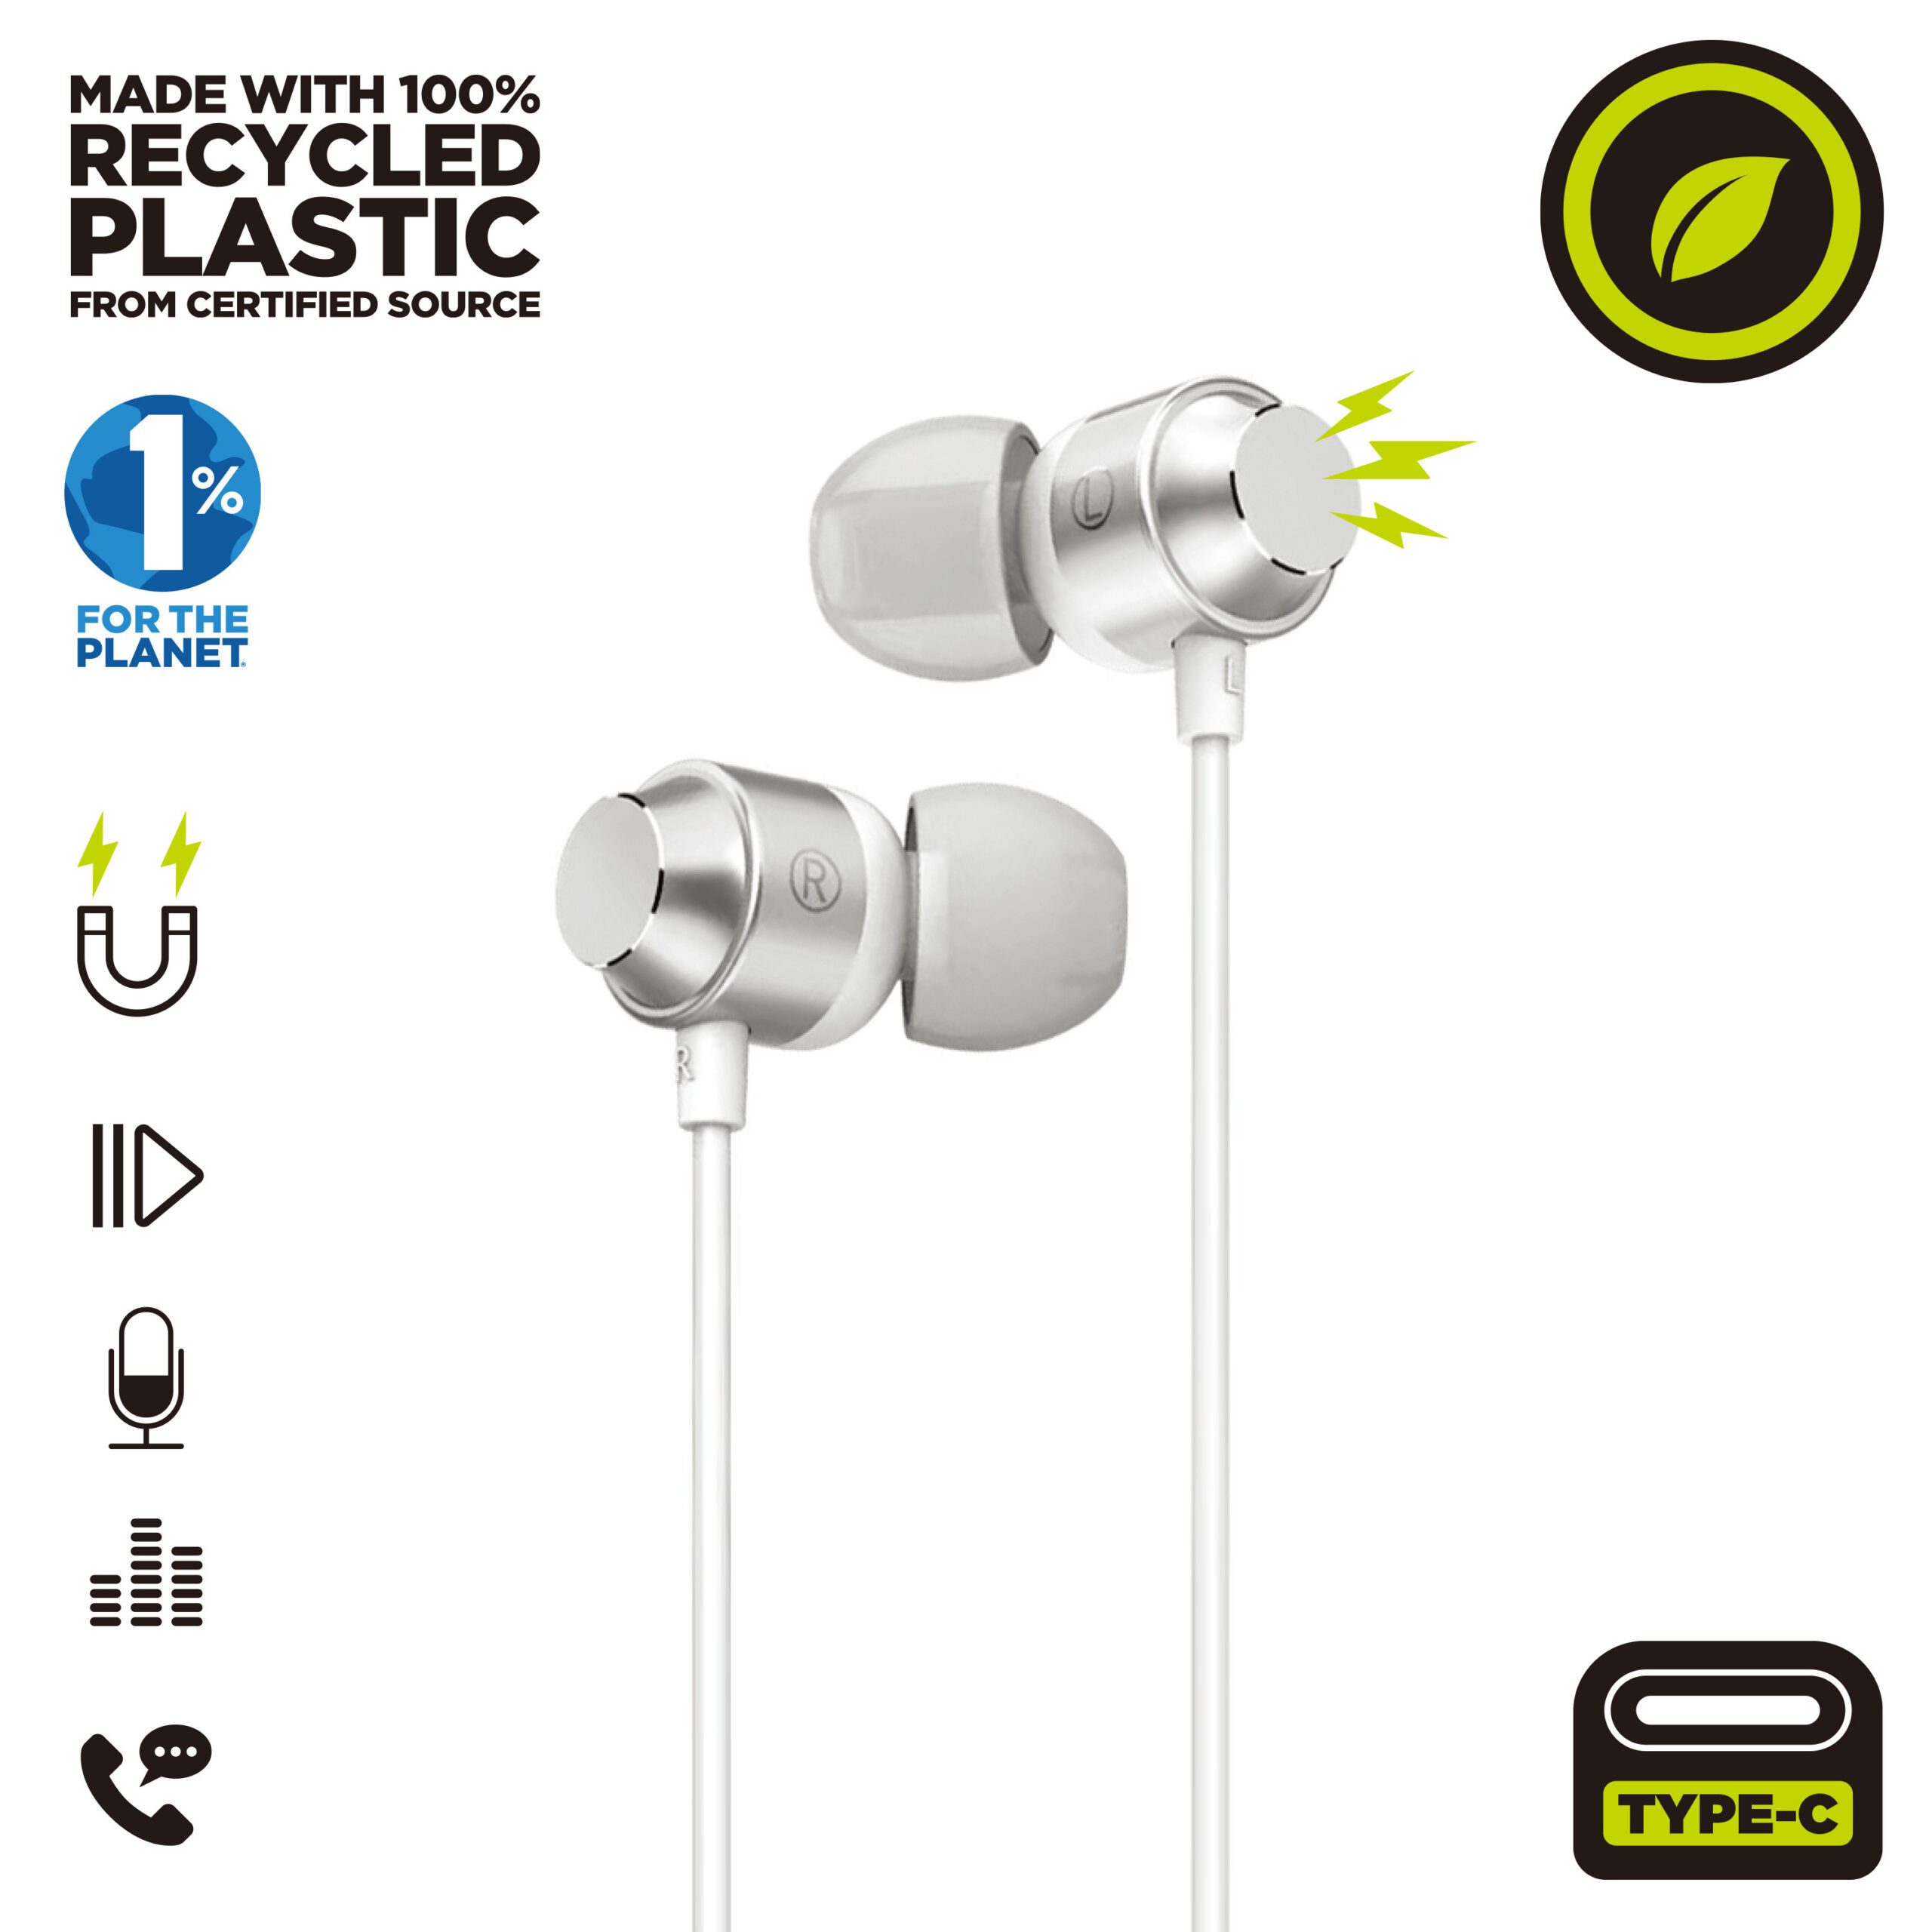 8426801170605-PN-MCHPH0007-Cod.-Articulo-DSP0000022121-Auriculares-magneticos-muvit-m32-usb-tipo-c-blanco-2